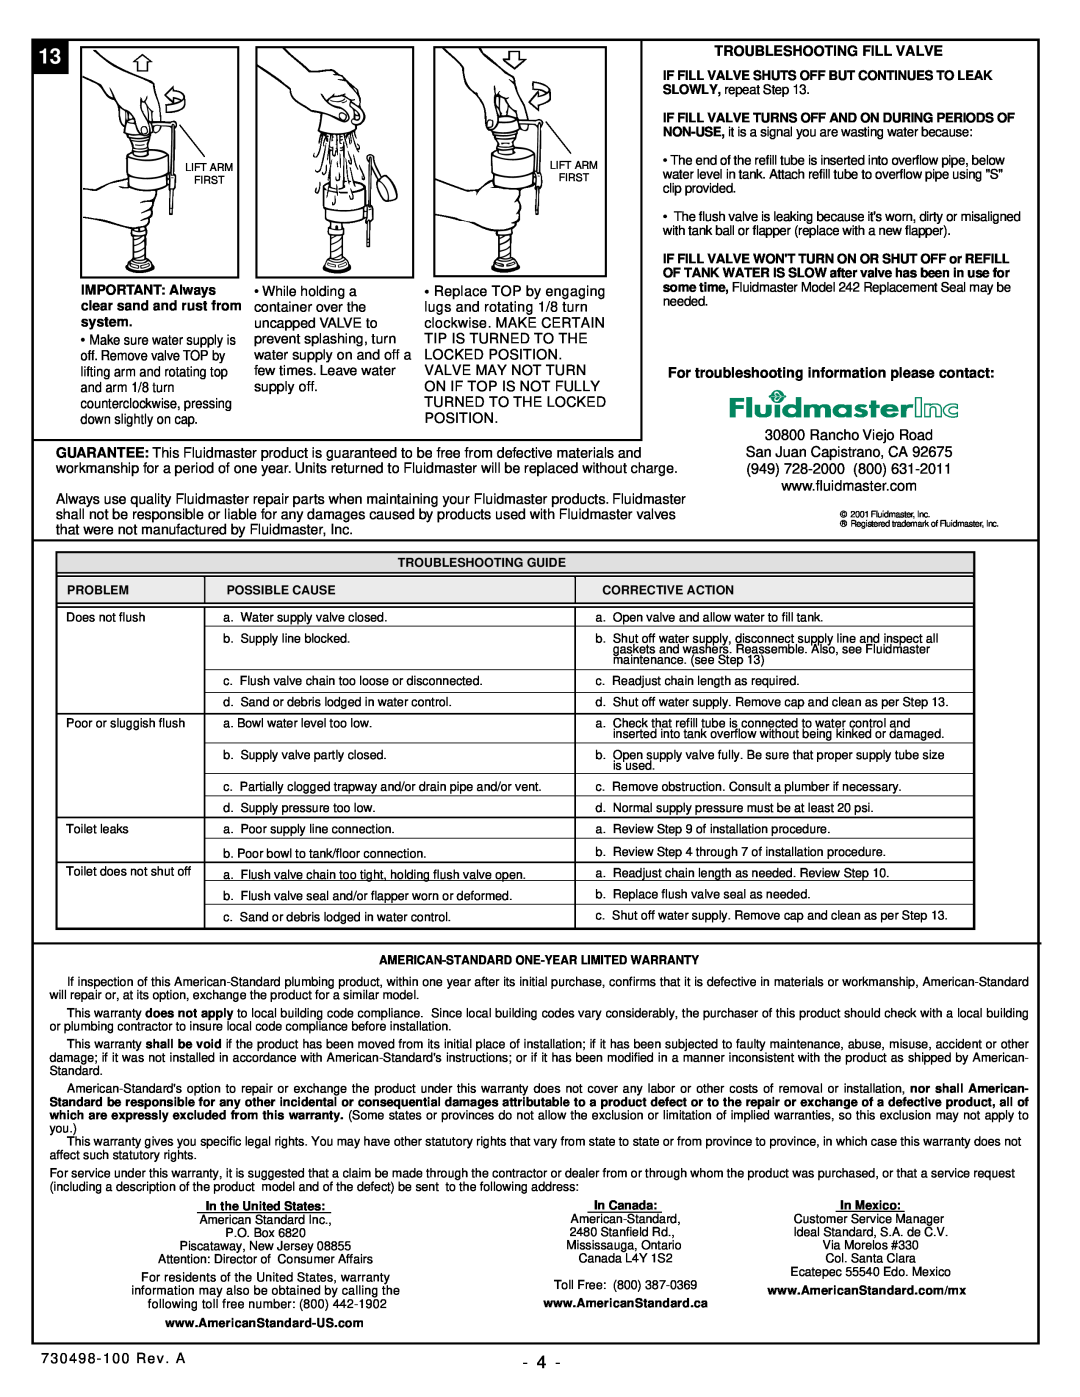 American Standard 2787 installation instructions Troubleshooting Fill Valve, For troubleshooting information please contact 